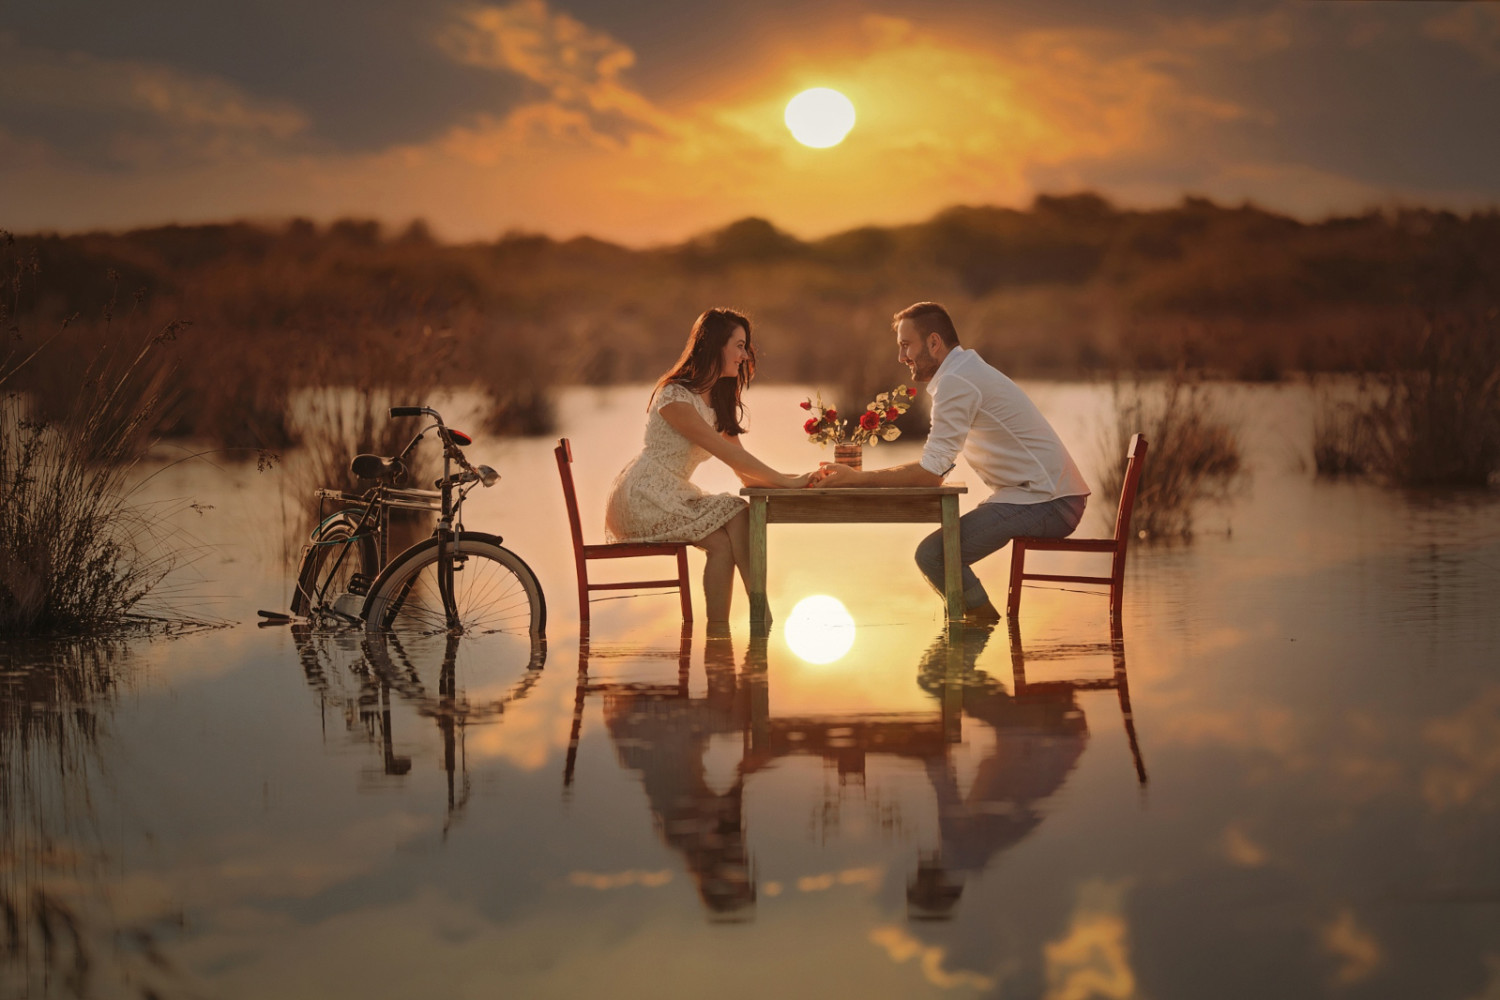 BTS: Capturing the Most Popular Valentine's Day Photo on 500px